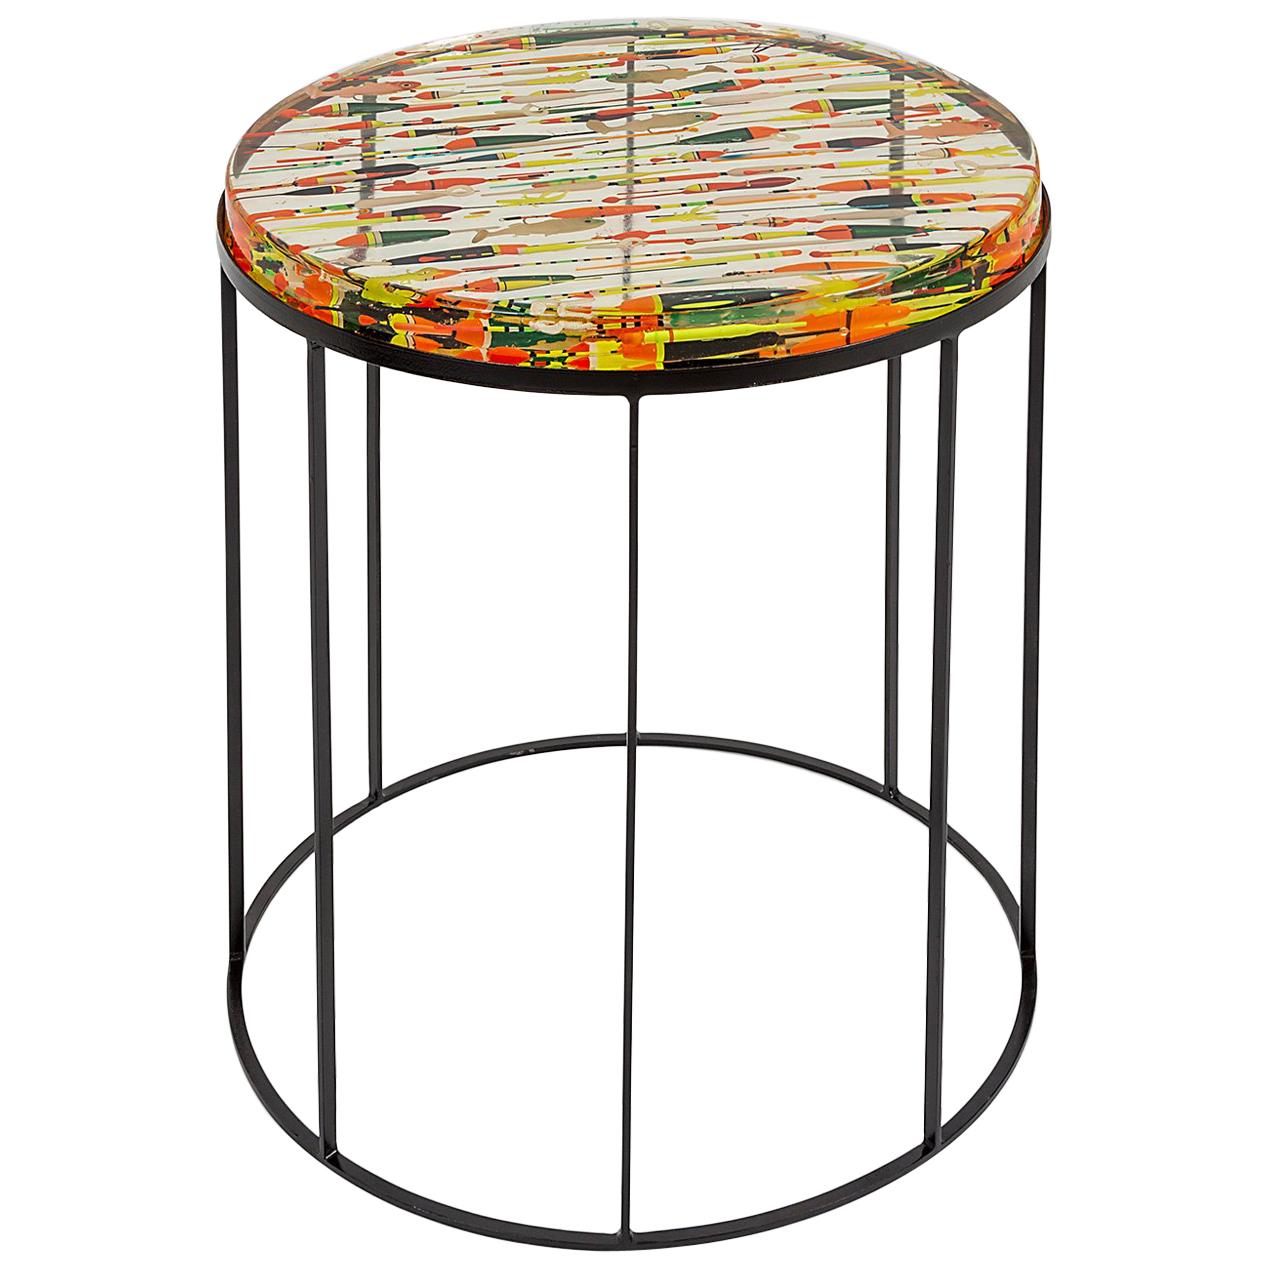 Galleggianti Side Table in Multi-Color Resin and Metal by Emanuela Crotti